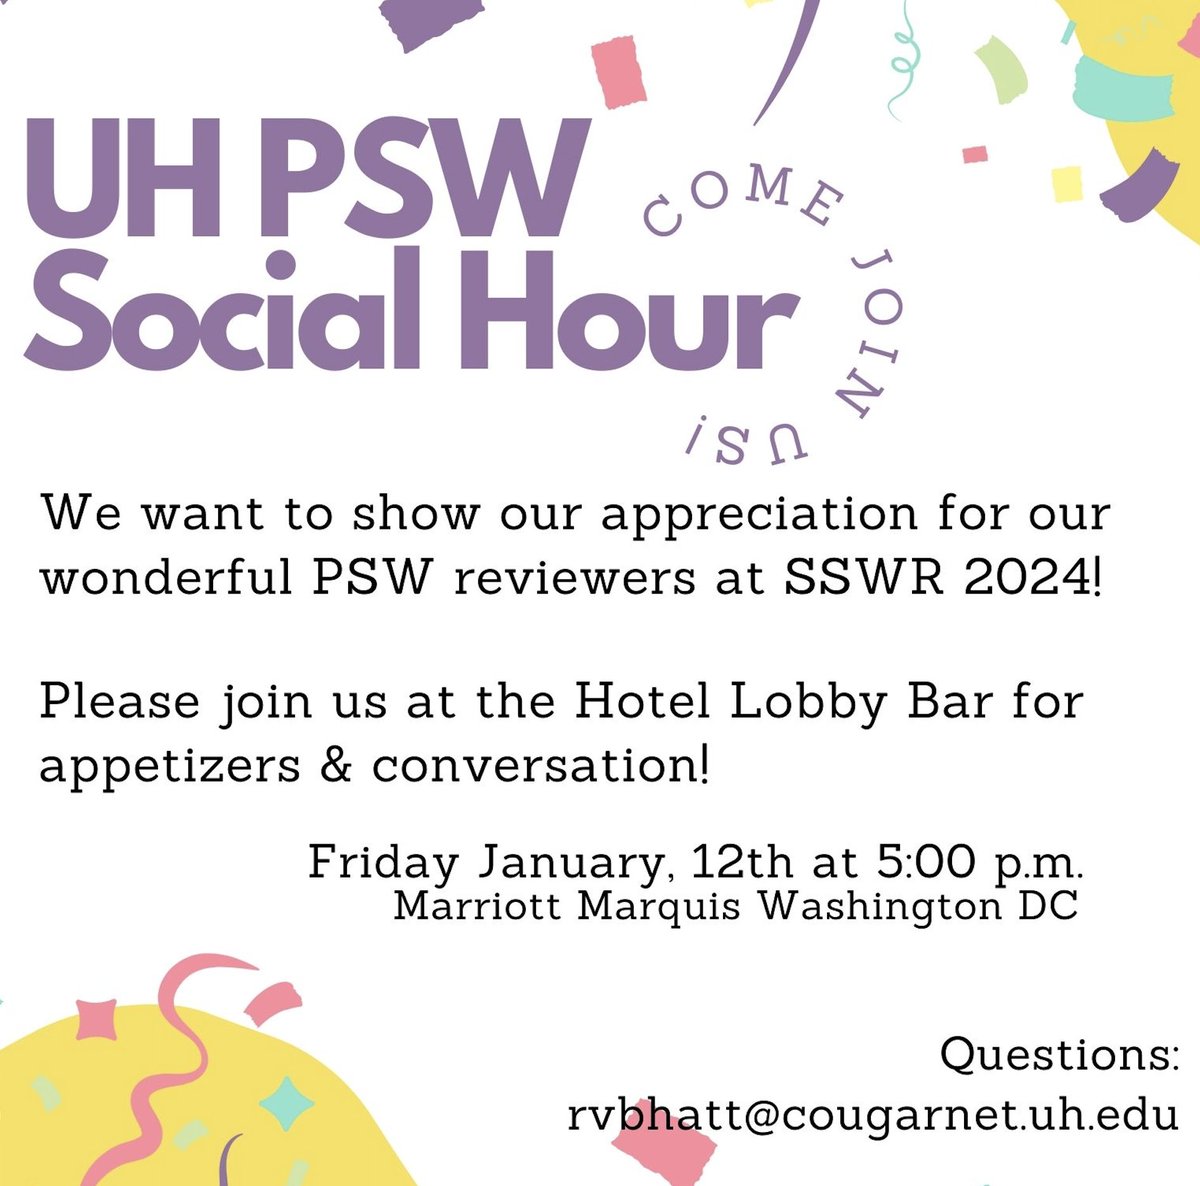 Join the @PSWjournal tomorrow at @SSWRorg! They will be hosting a social hour at 5 p.m. at the Hotel Lobby Bar! #SSWR2024